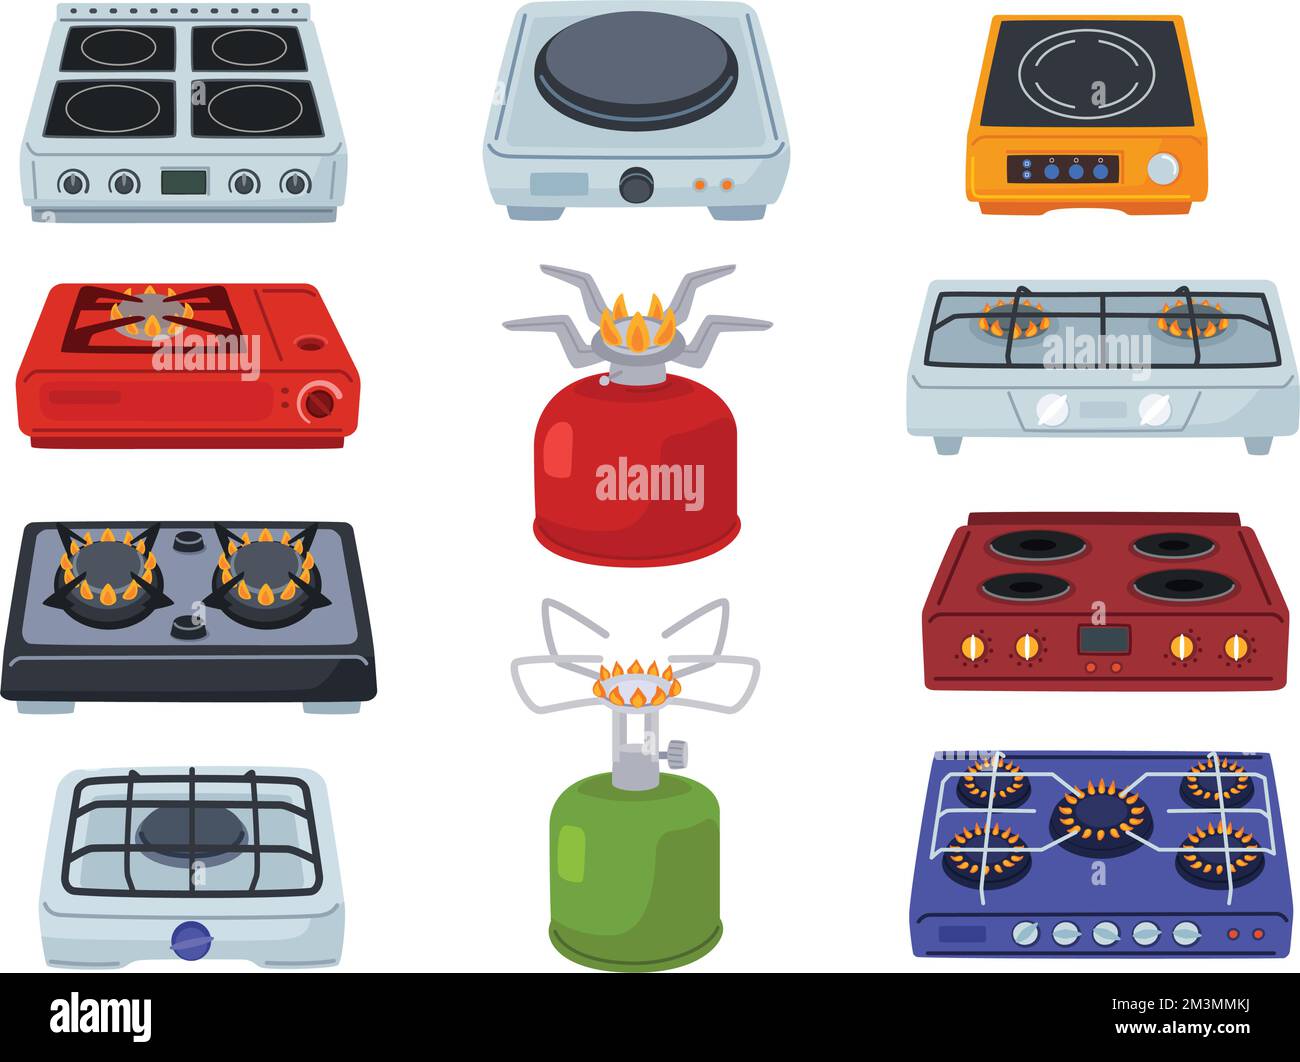 Cartoon stoves. Kitchen electric hob, camping stove gas burner and cooking fire vector illustration set of kitchen hob, and oven collection Stock Vector